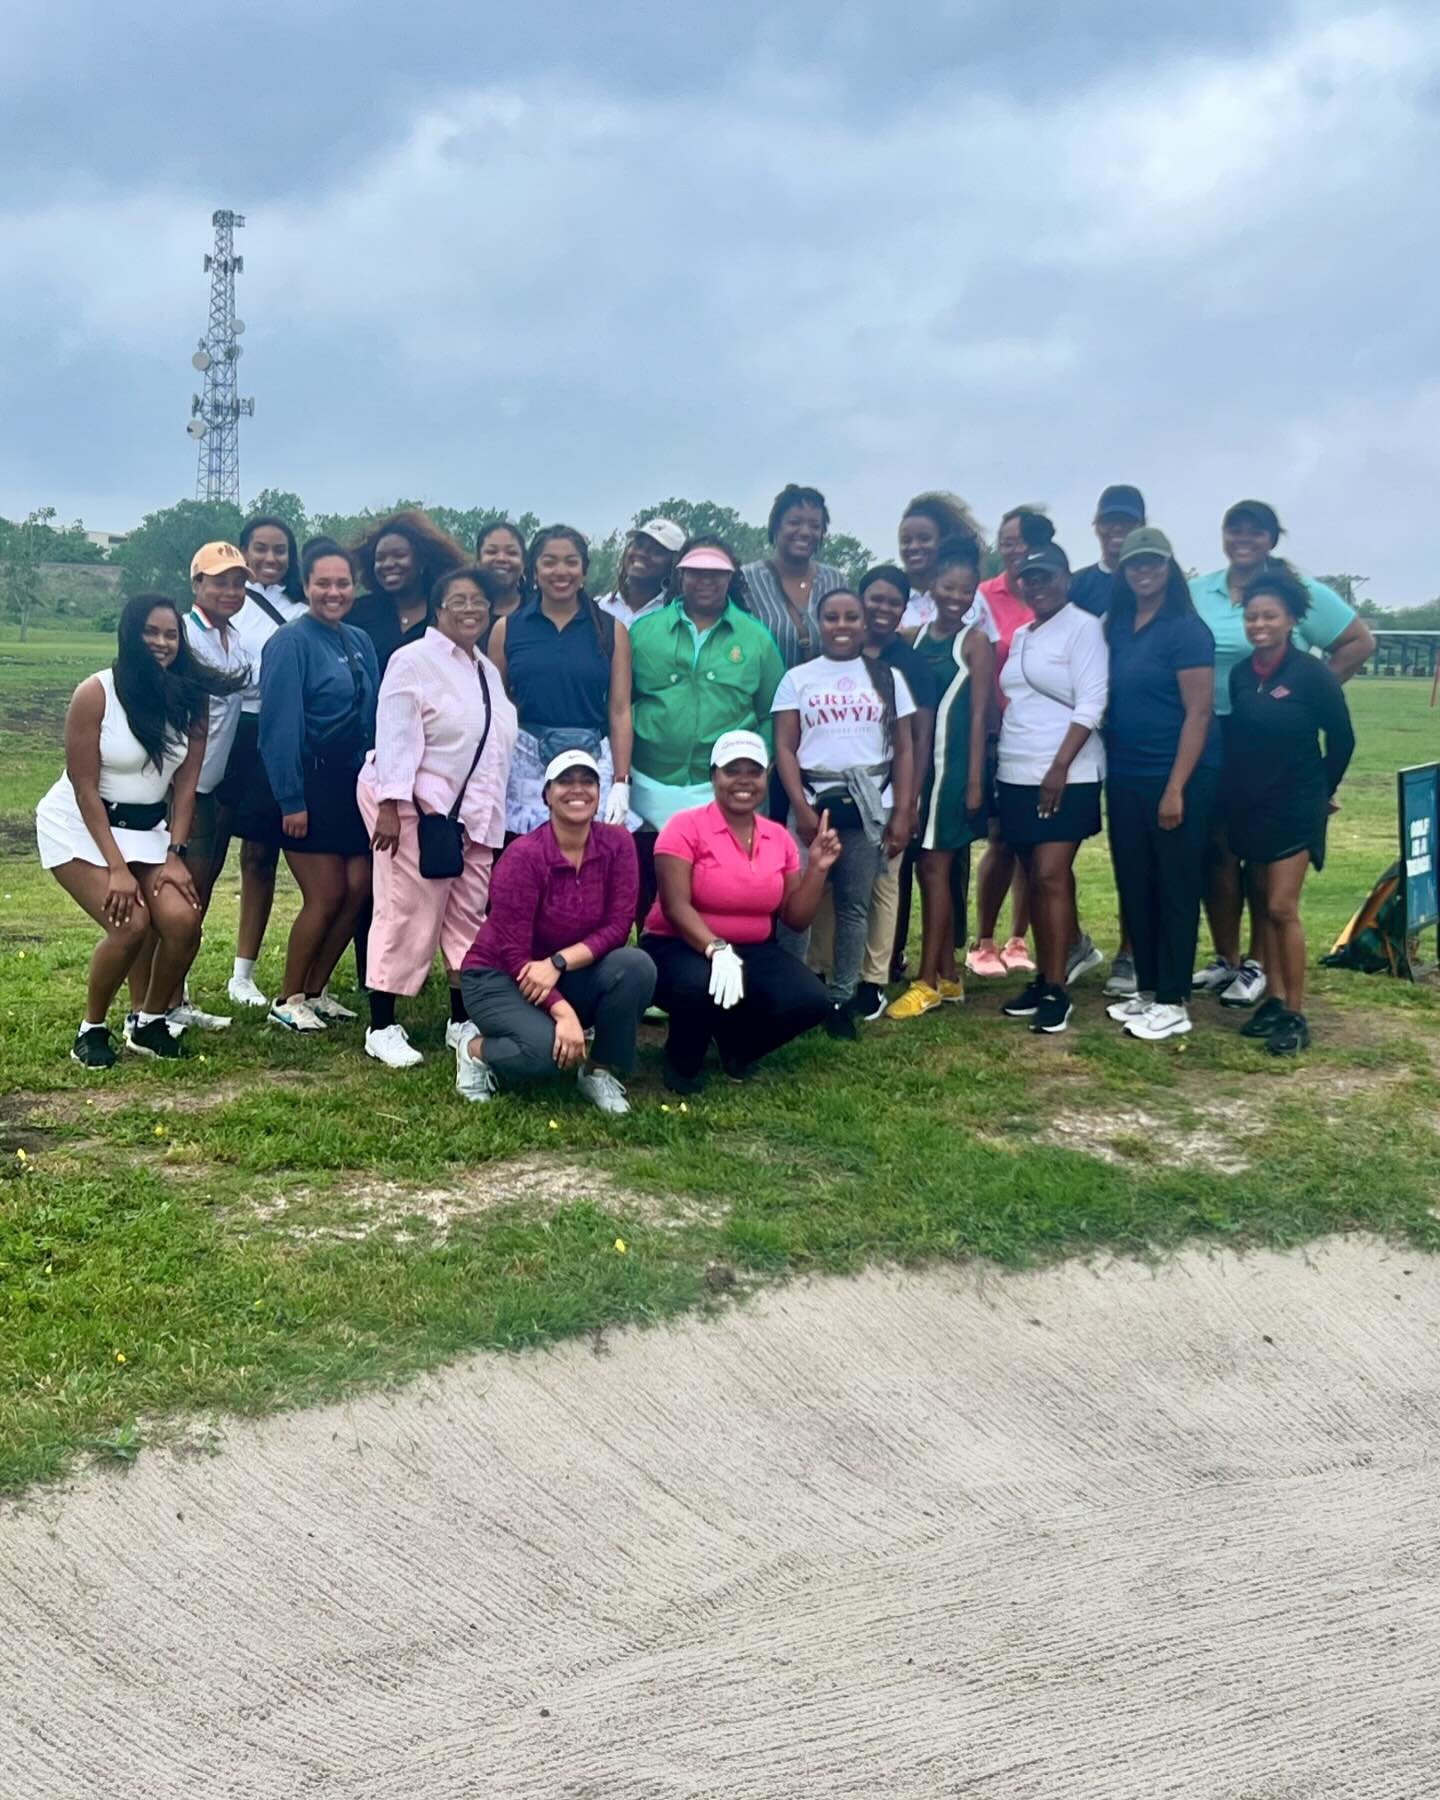 DBWA Golf Clinic&hellip;we enjoyed a cool golf skills clinic today. Luckily the rain didn&rsquo;t ruin our plans! ⛳️❤️⚖️🎉

**This may be the 20th anniversary of this JLTLA event!